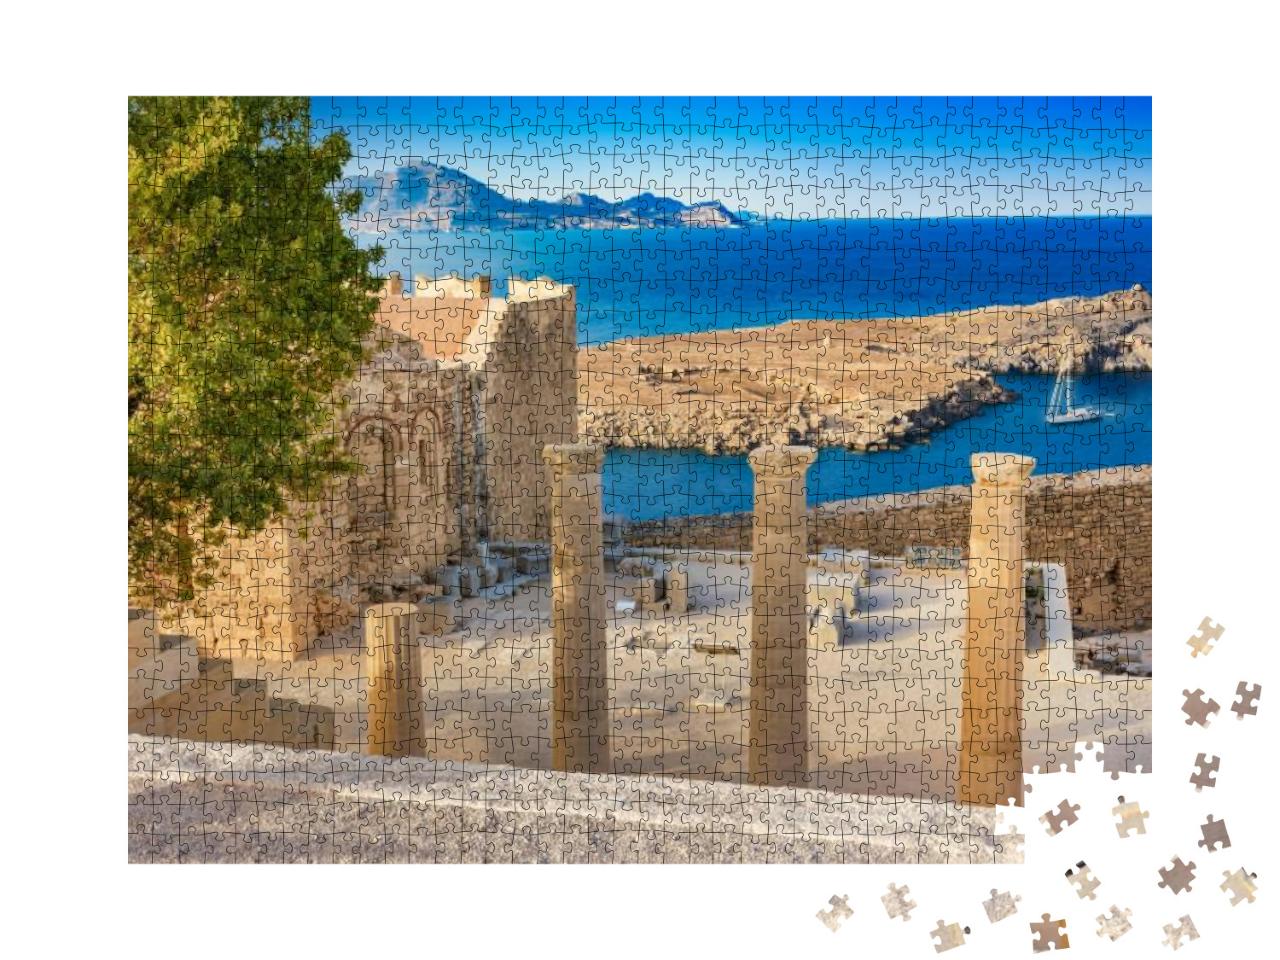 Staircase of the Propylaea & Church of St. John on the Ac... Jigsaw Puzzle with 1000 pieces